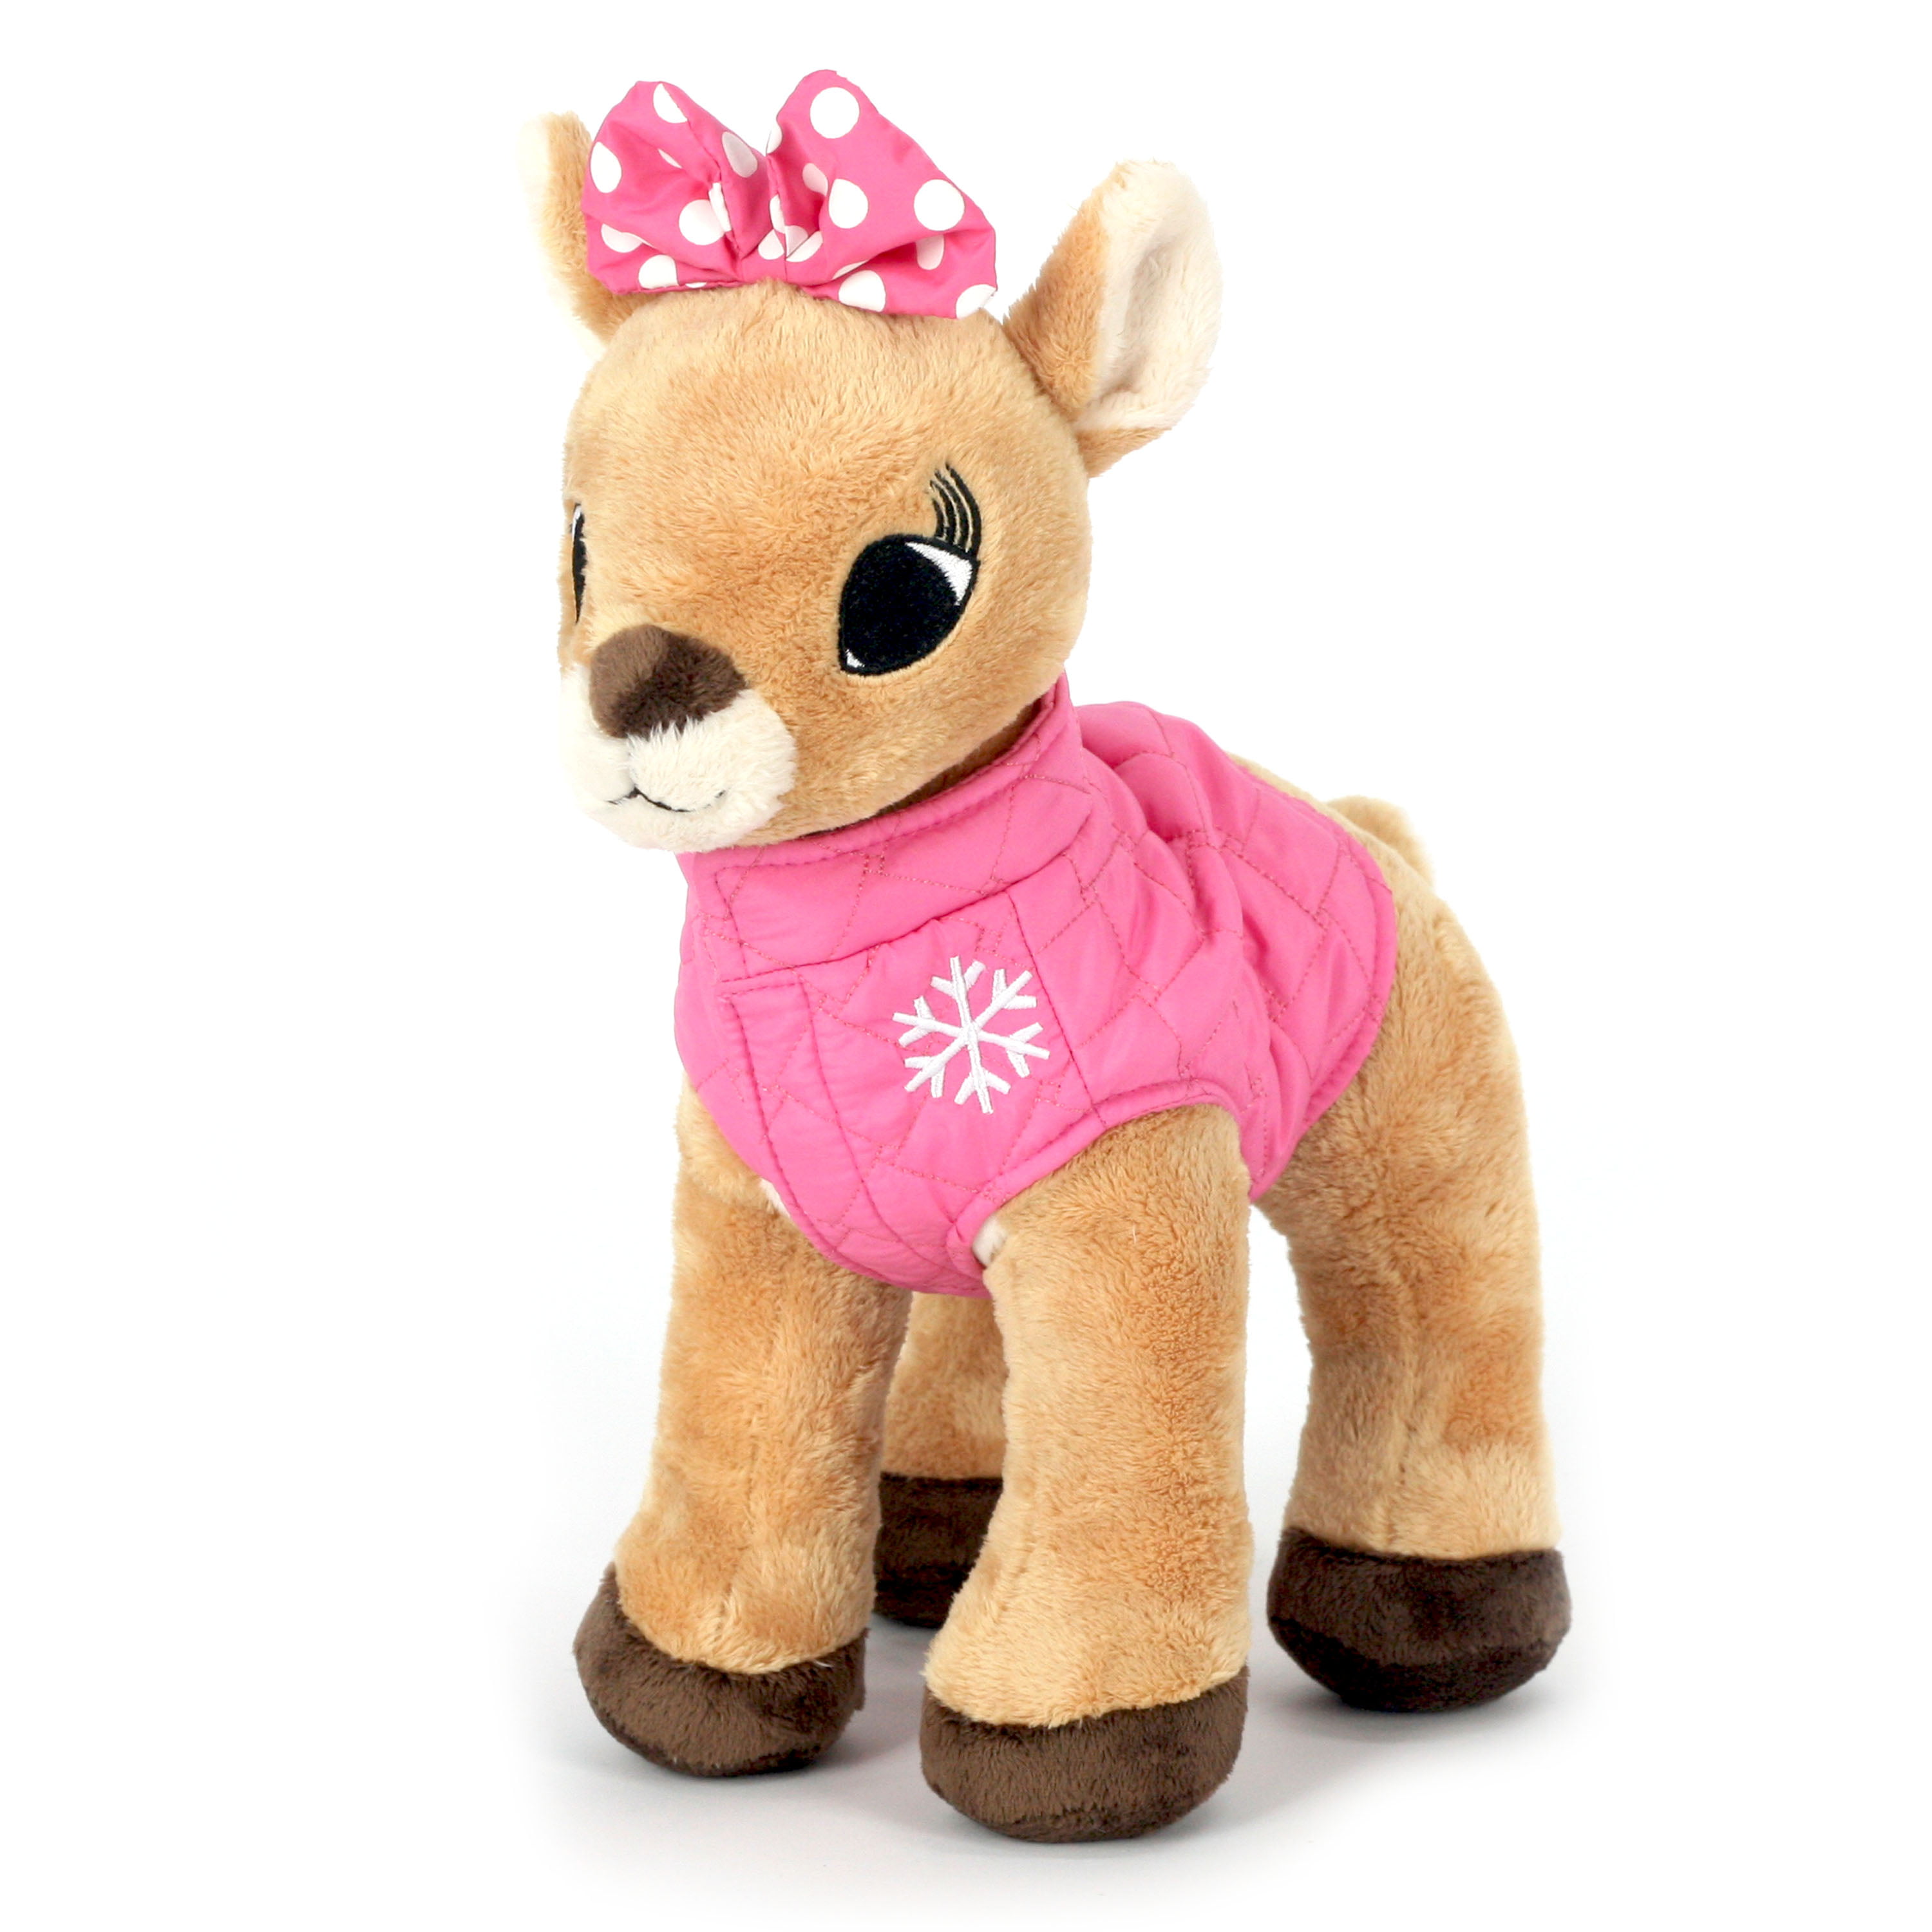 rudolph red nosed reindeer stuffed animal